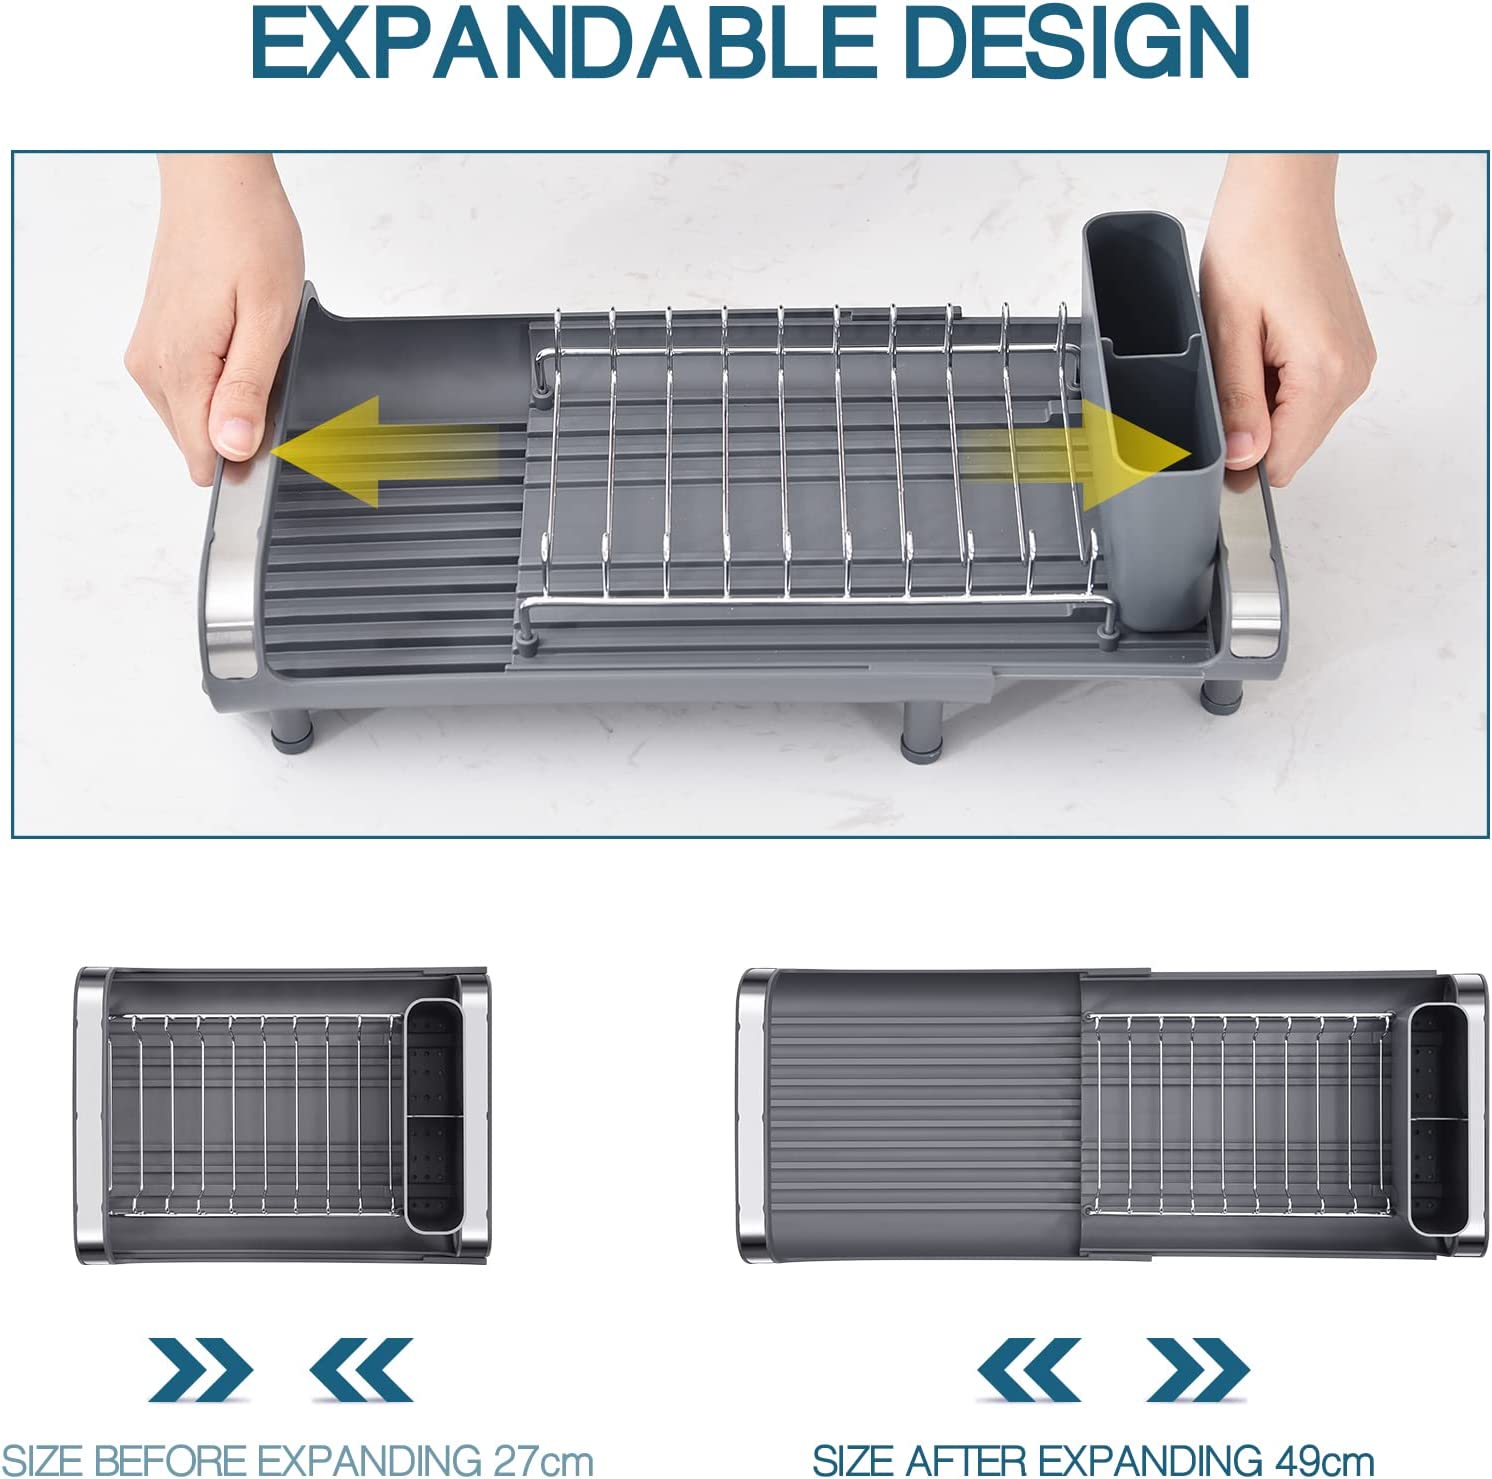 Kingrack Expandable Dish Drying Rack, Small Dish Drainer Rack for Kitchen  Counter Organizers, Stainless Steel, Non-Slip Feet, Anti Rust Sink Plate  Rack 